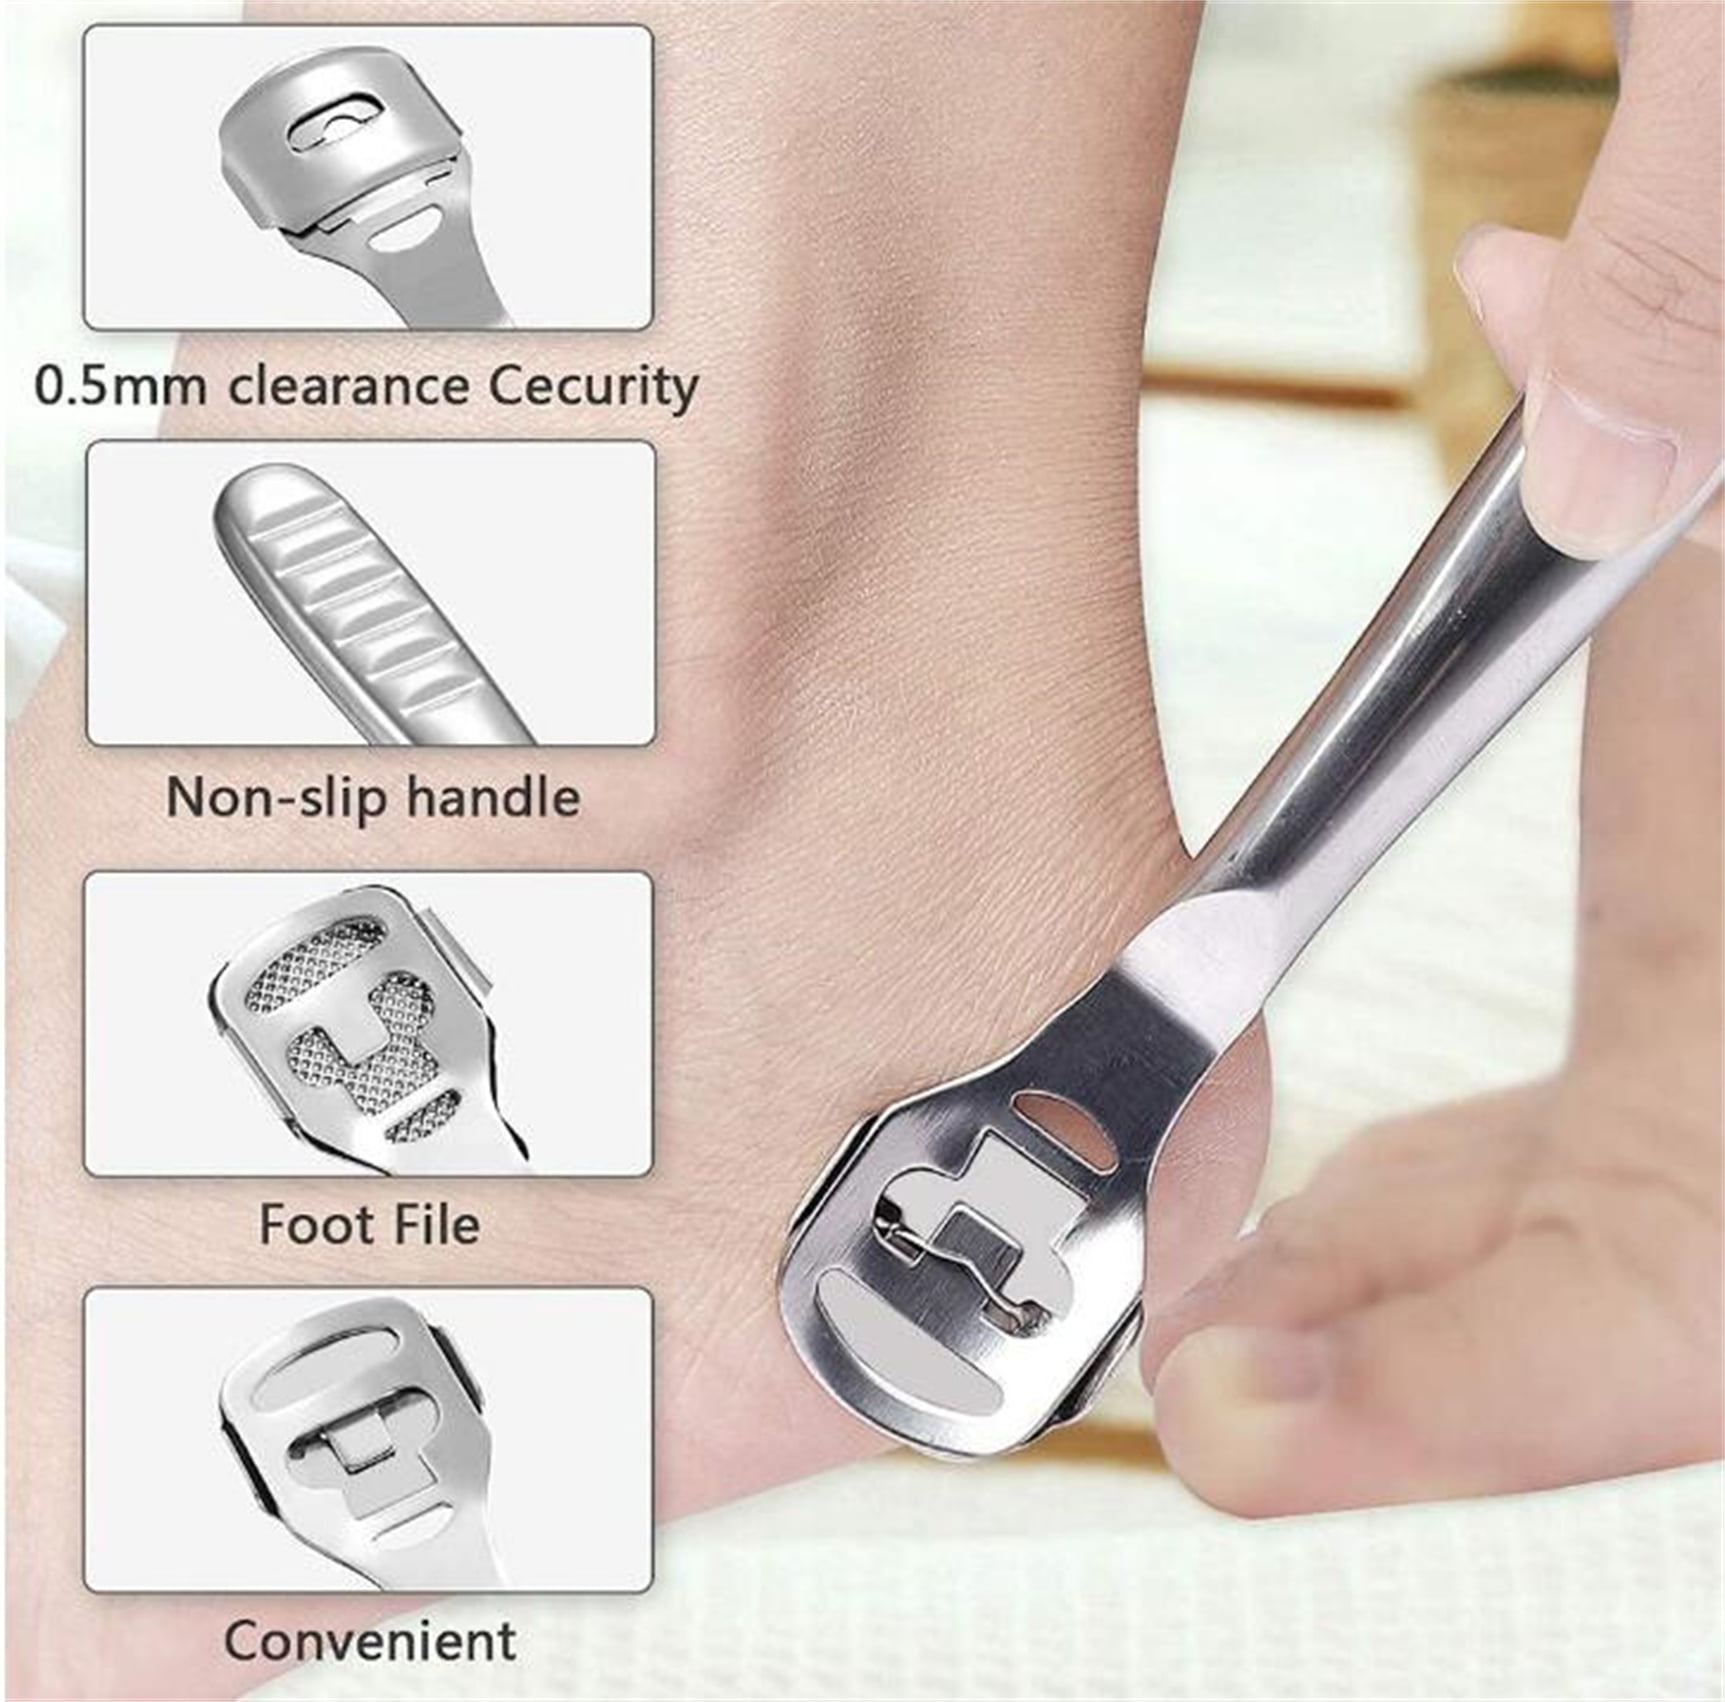 Stainless Steel Pedicure Knife Foot Care Callus Dead Skin Remover Scraper -  PB Nails Doncaster